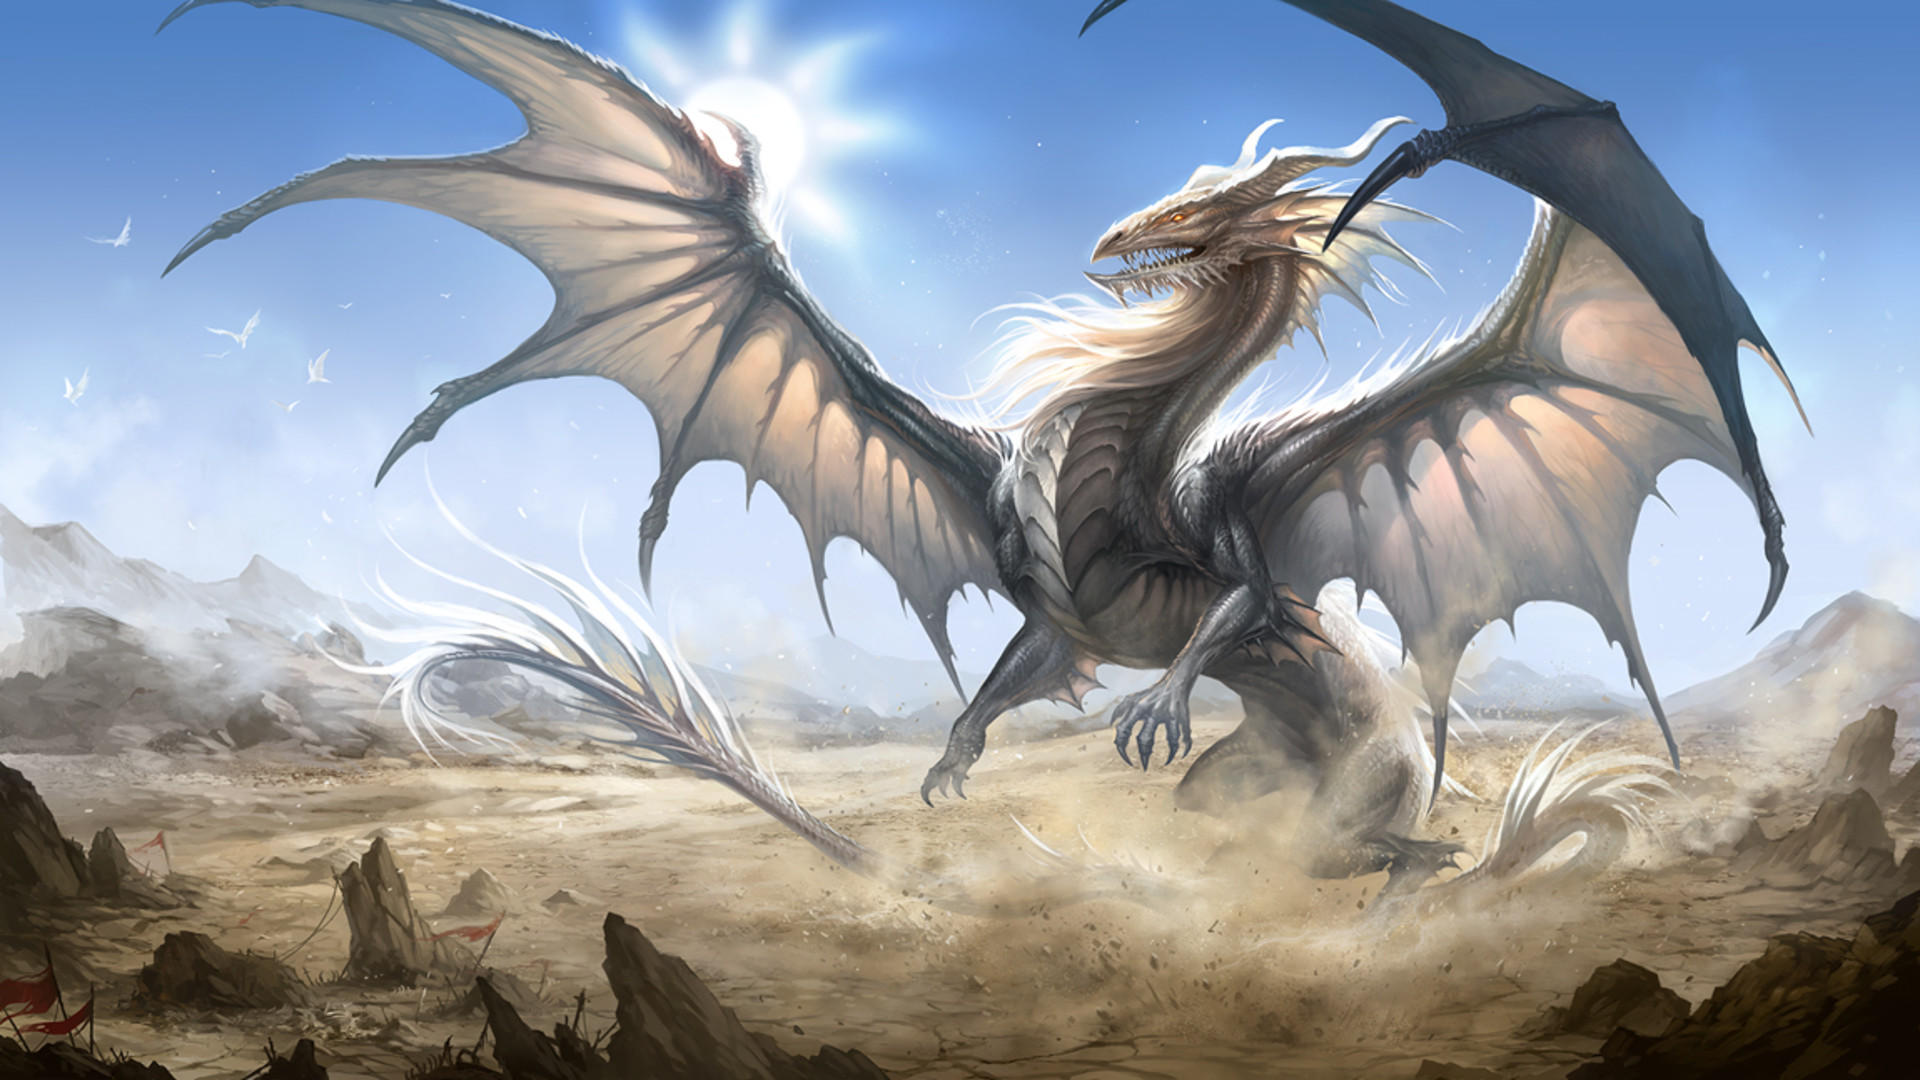 1920x1080 Dragon HD Wallpaper | Background Image |  | ID:441572 - Wallpaper  Abyss